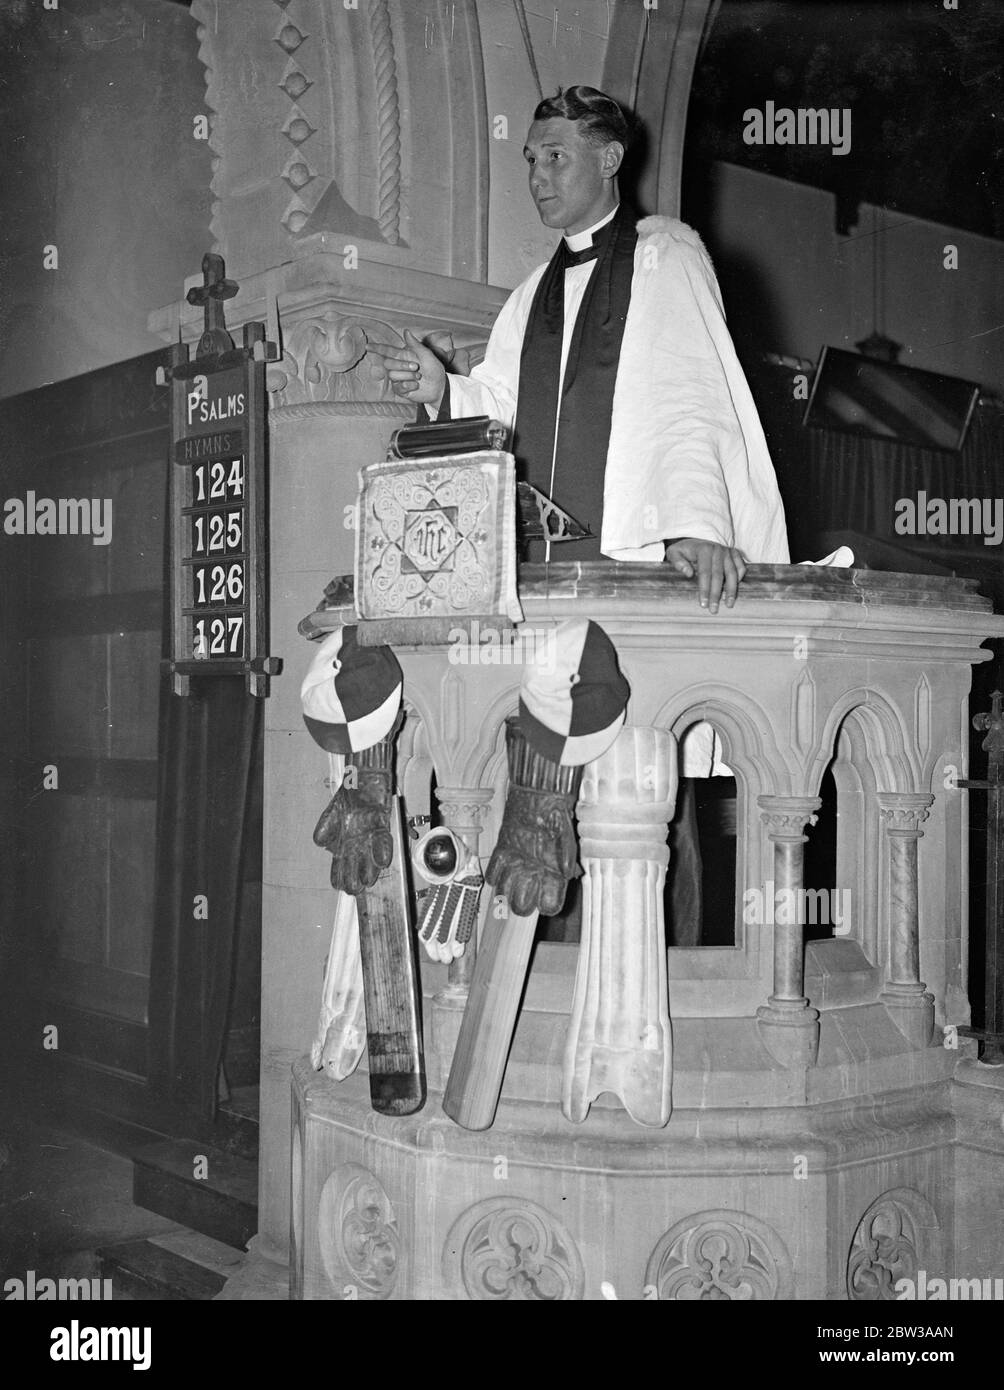 Pulpit decorated with cricket bats and pads at sportsman ' s service . The pulpit at St Saviours Church , Herne Hill , London , was decorated with cricket bats and pads , at a special service attended by a large number of sportsmen from all over South London . The service was conducted by the Rev G Blacktop of Roselyn Park , Surrey . Photo shows the Rev G Blacktop preaching from the decorated pulpit . 2 April 1934 Stock Photo